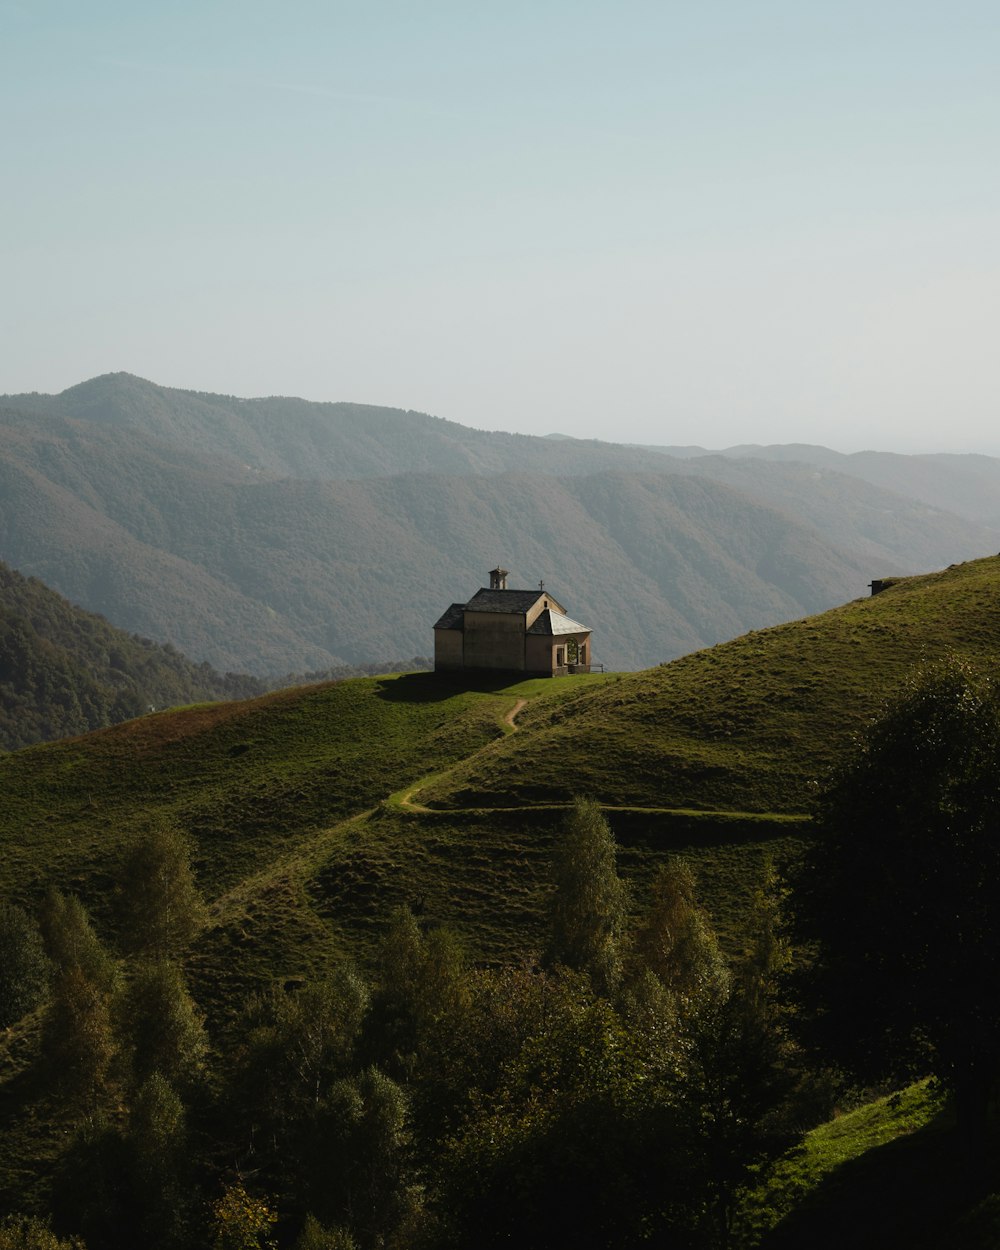 a house on a grassy hill with mountains in the background